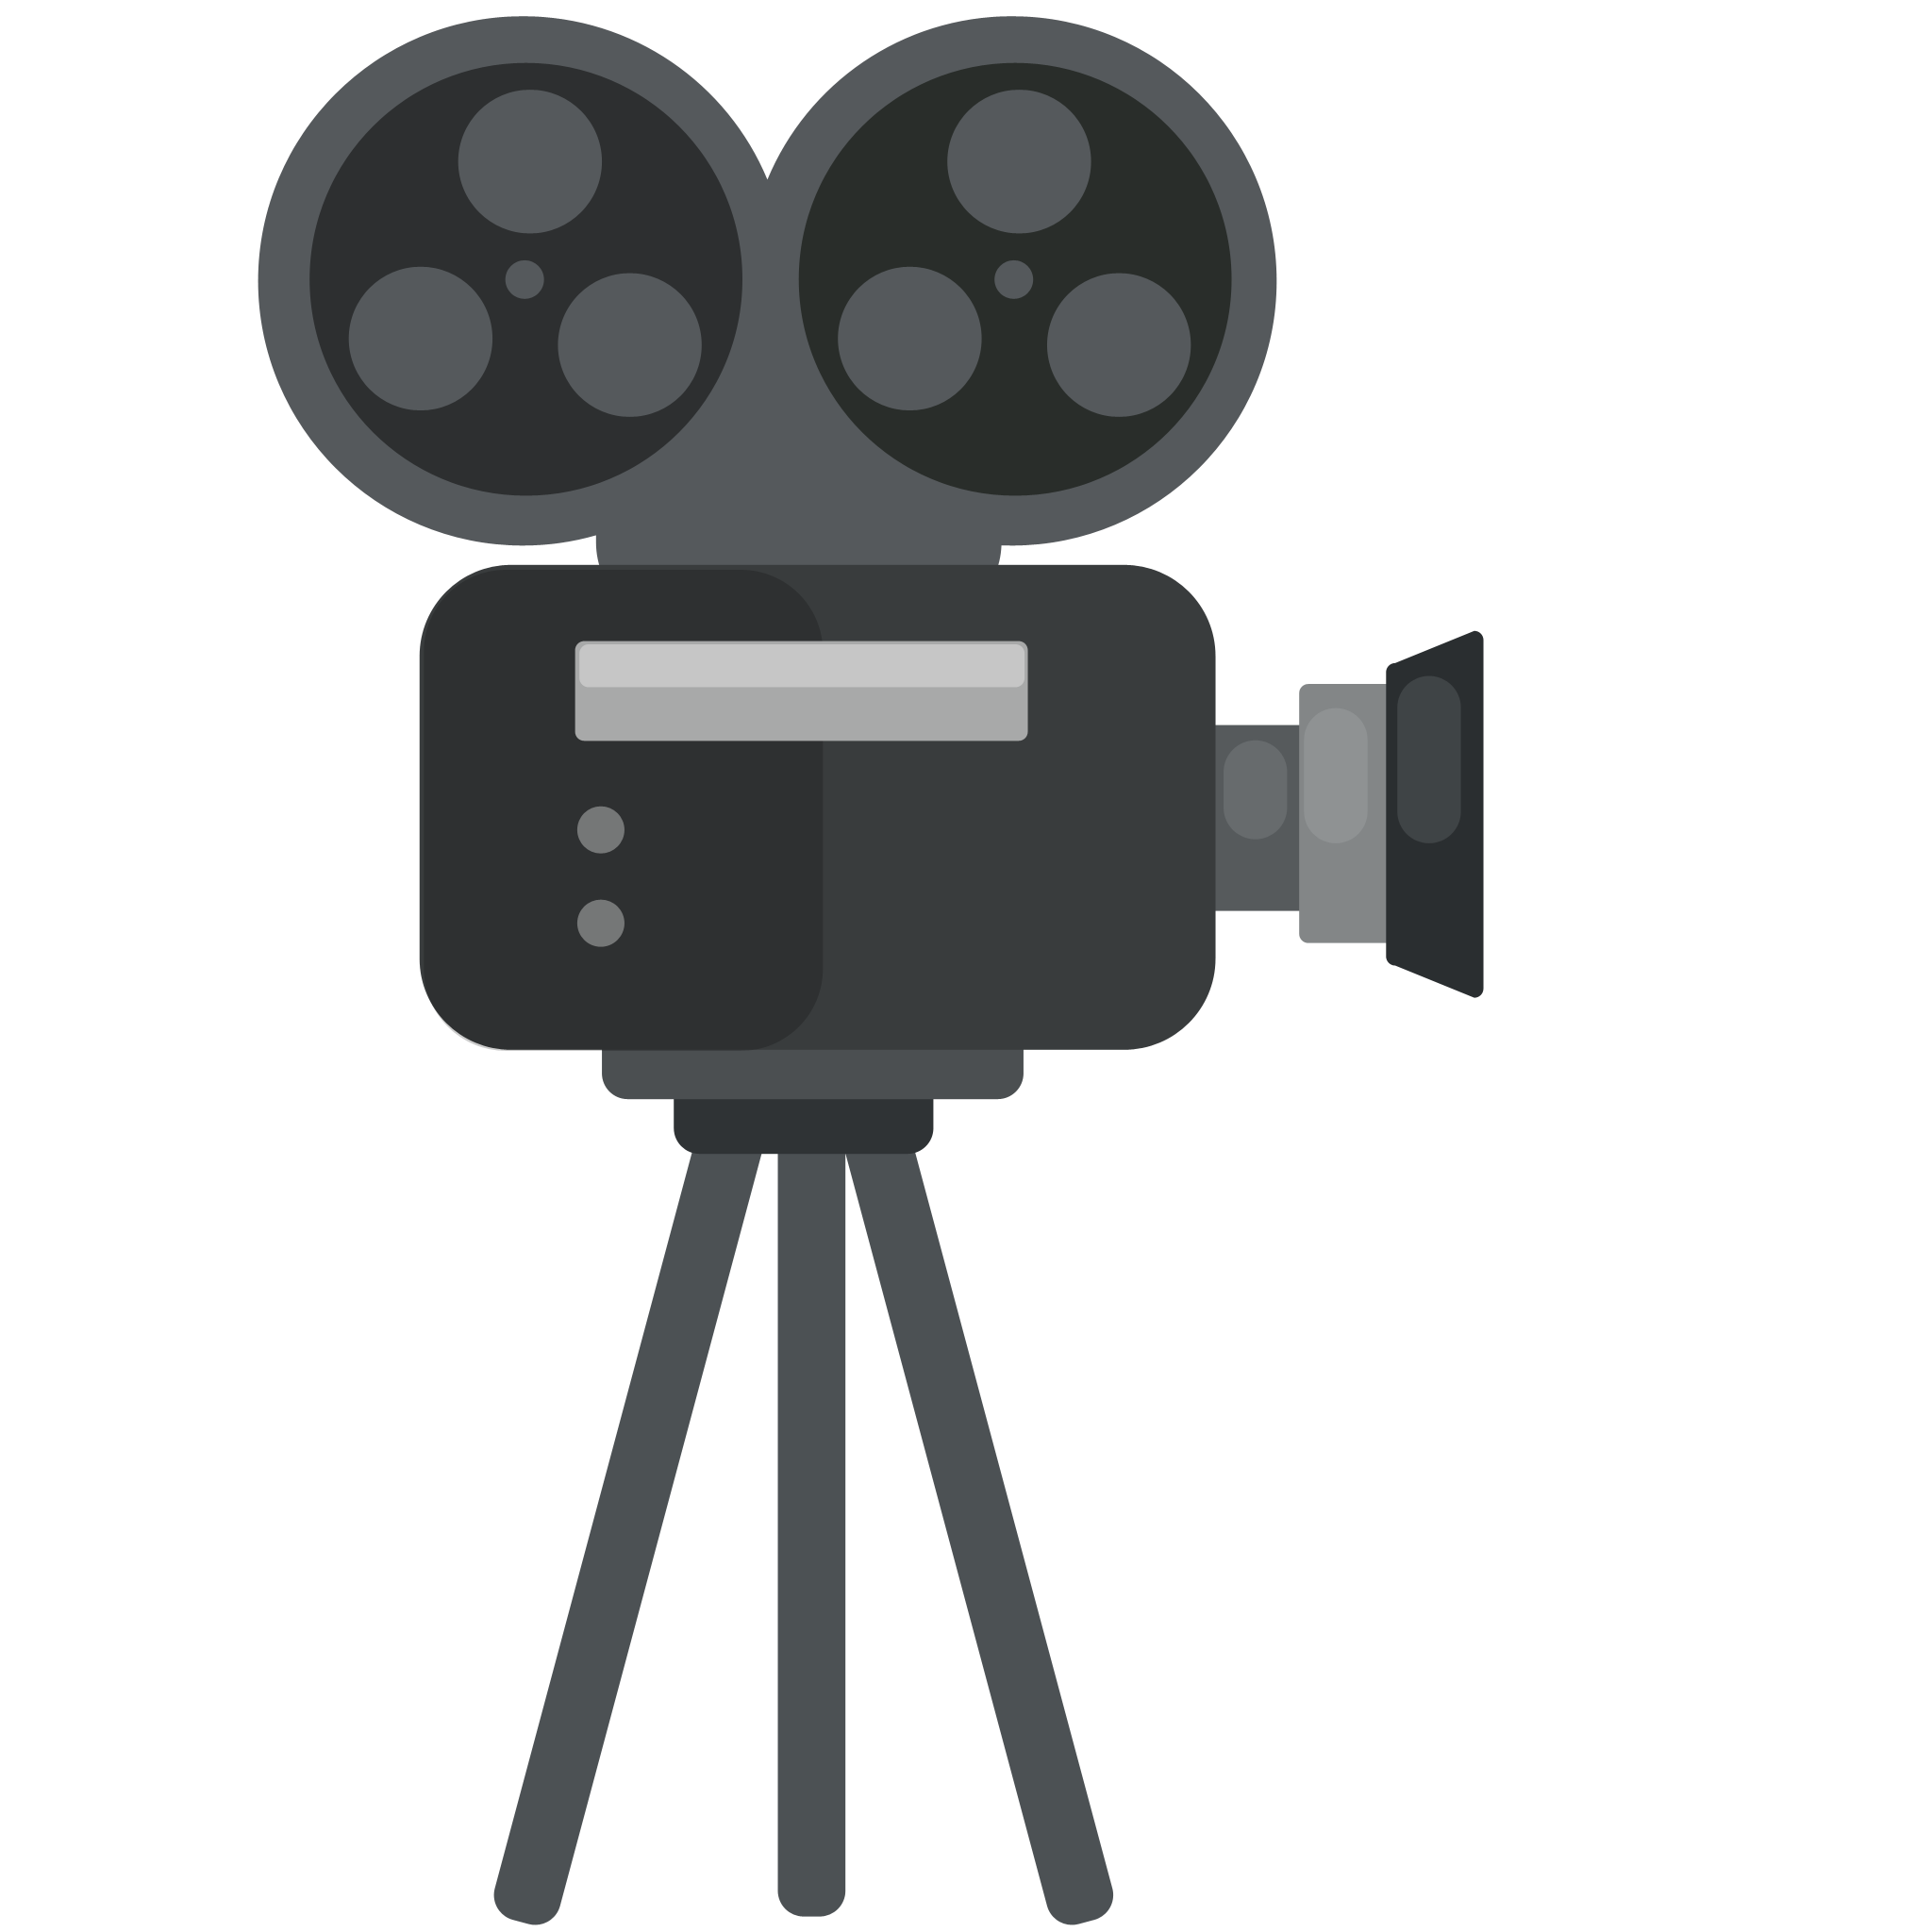 Camera videocassette recorder flat. Video clipart videography